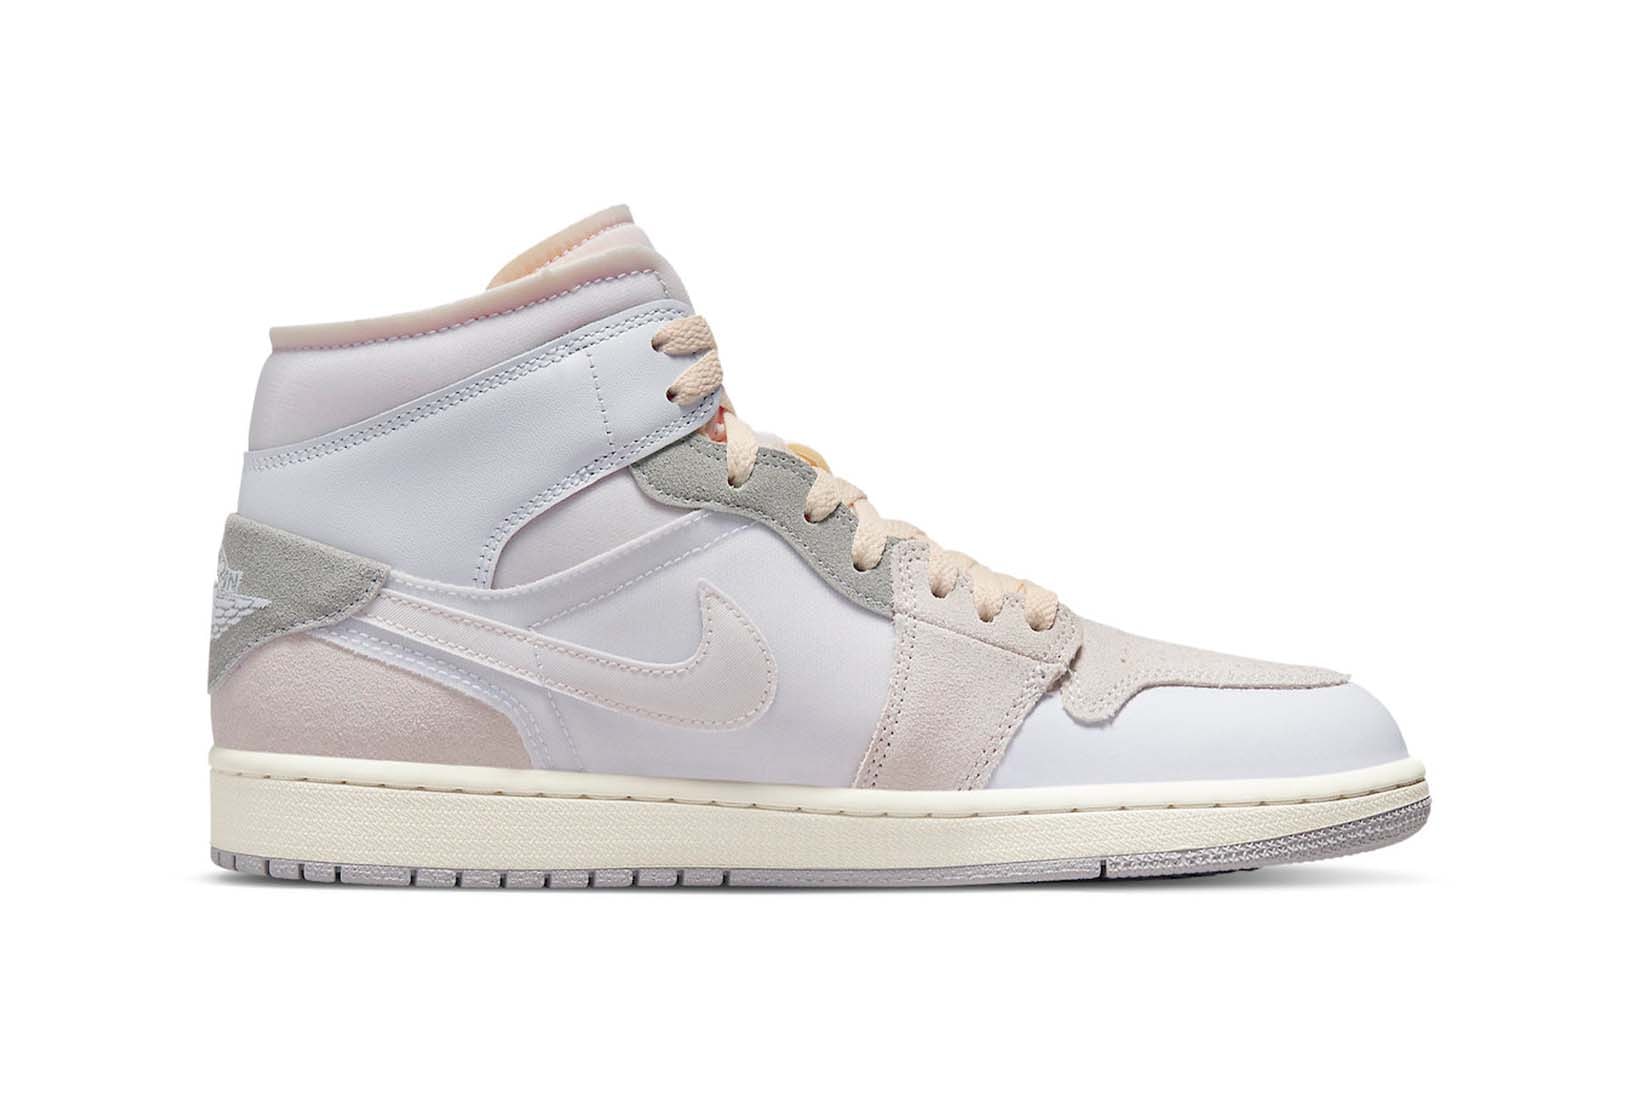 Nike Air Jordan 1 Mid Insole Out Price Release Date